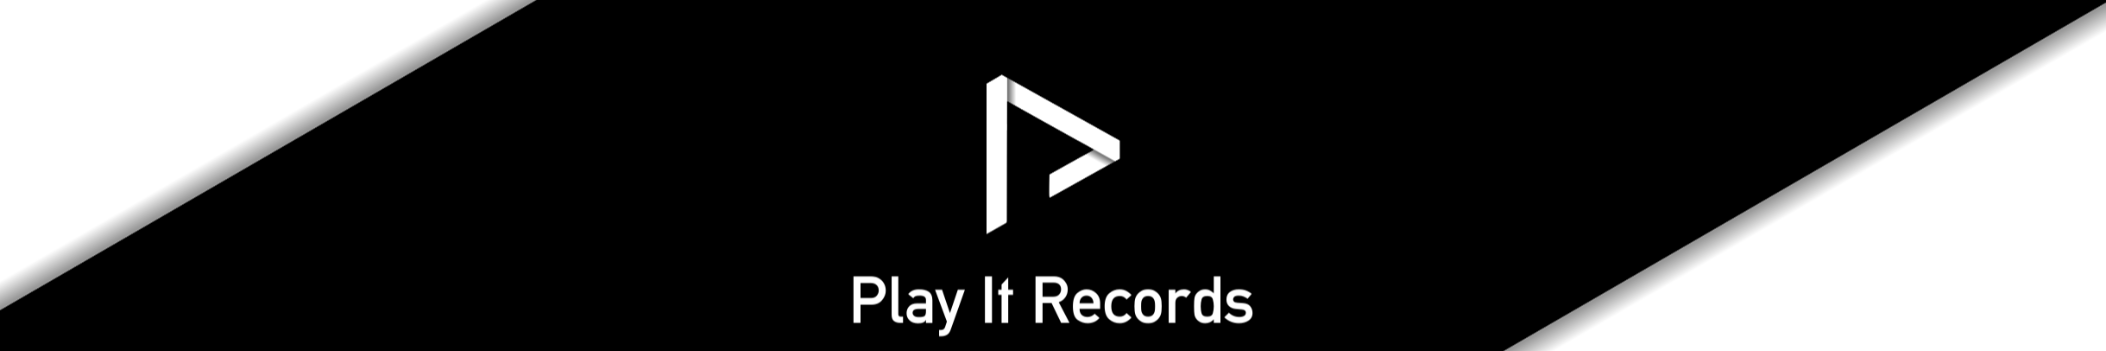 Play It Records